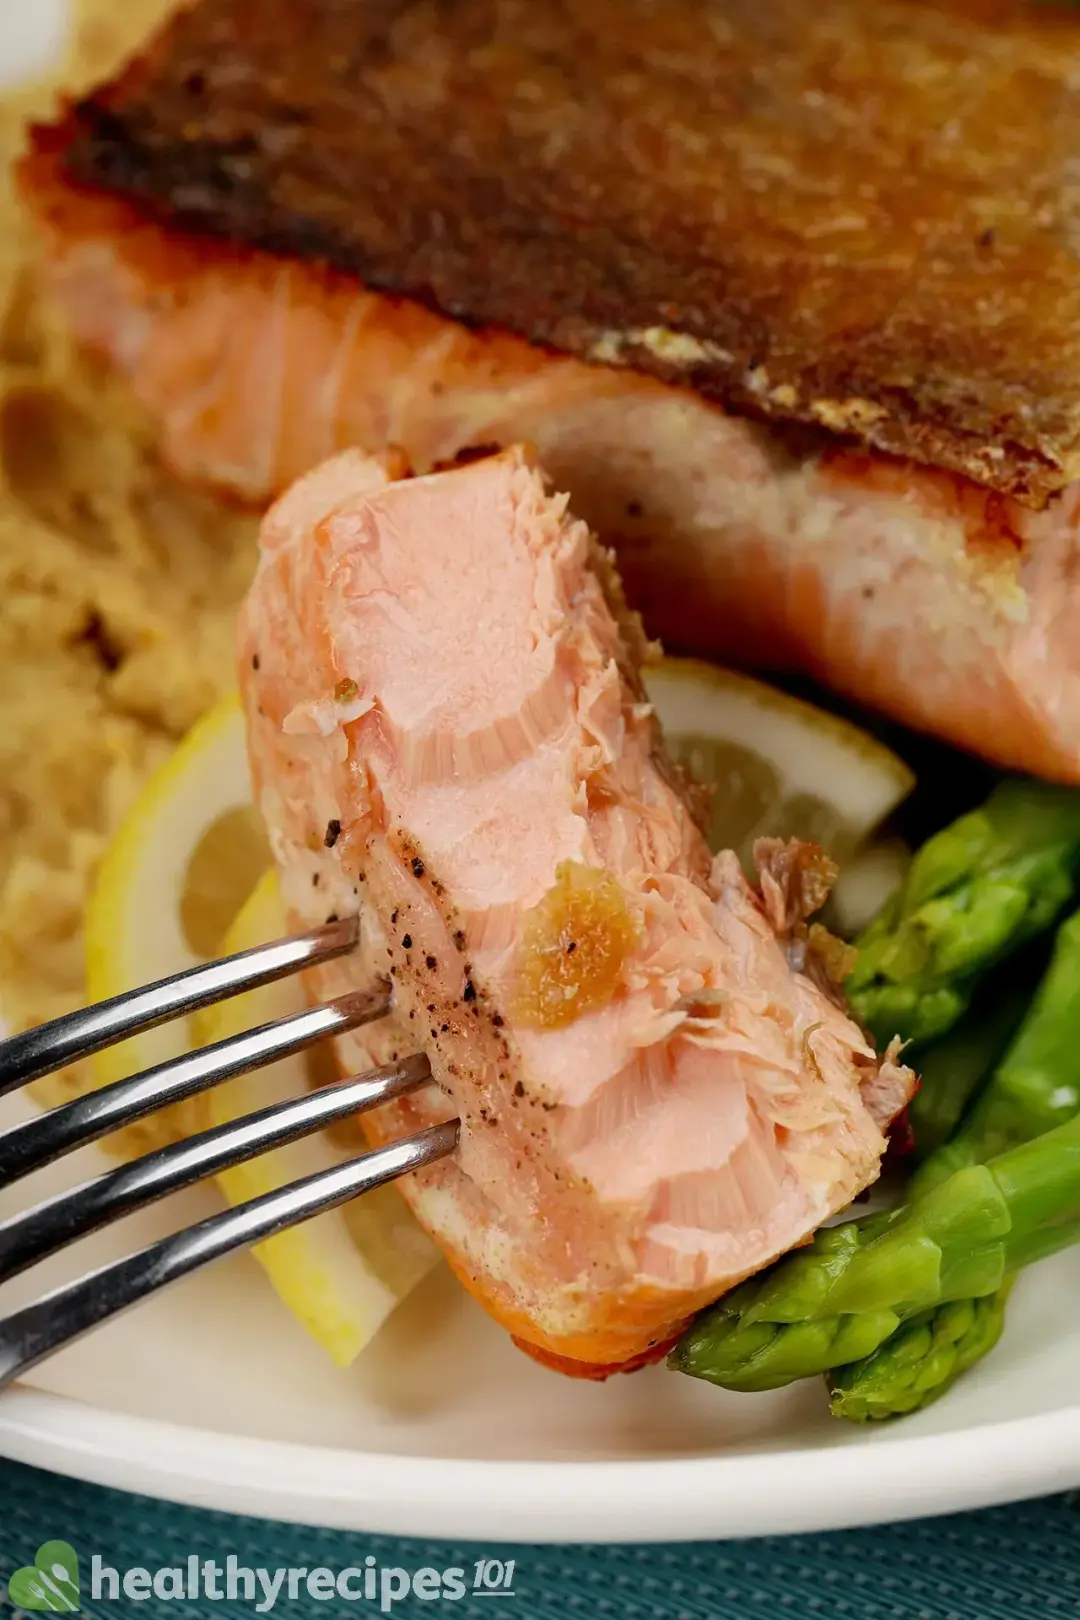 A plate of crispy-skin salmon served with mashed chickpeas, boiled asparagus, and two slices of lemon